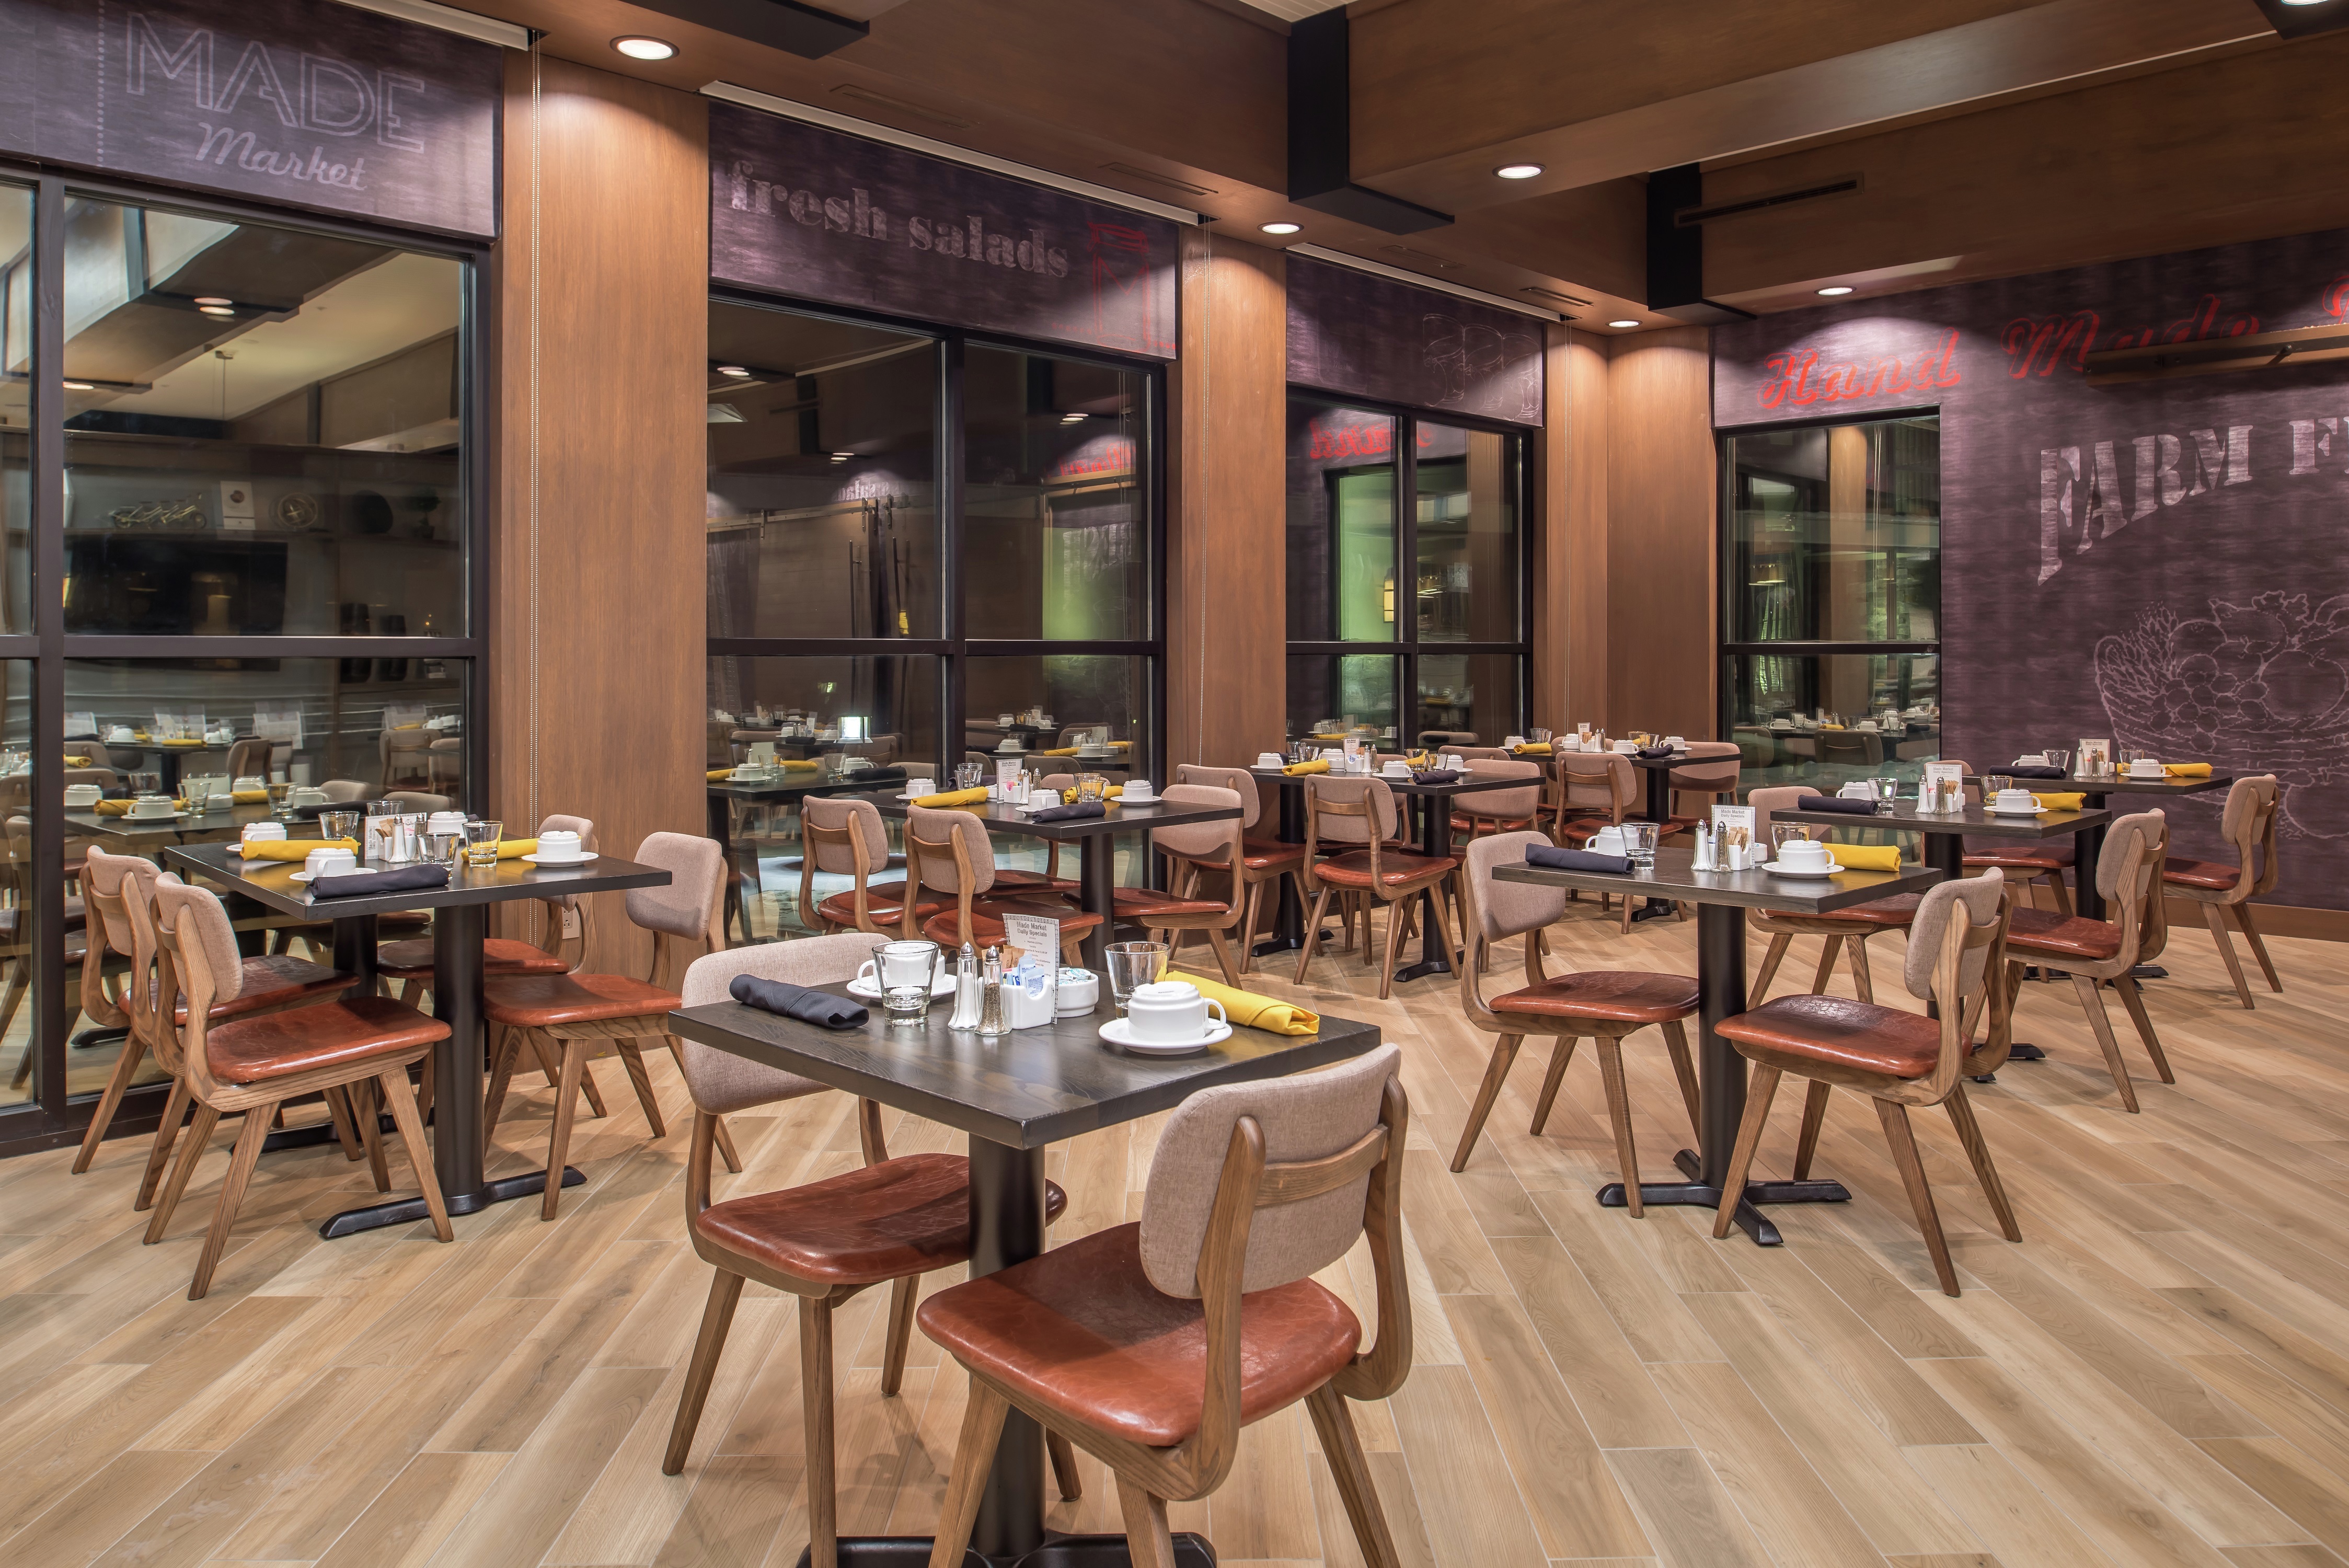 Dining Tables and Chairs in Made Market Restaurant With Large Windows